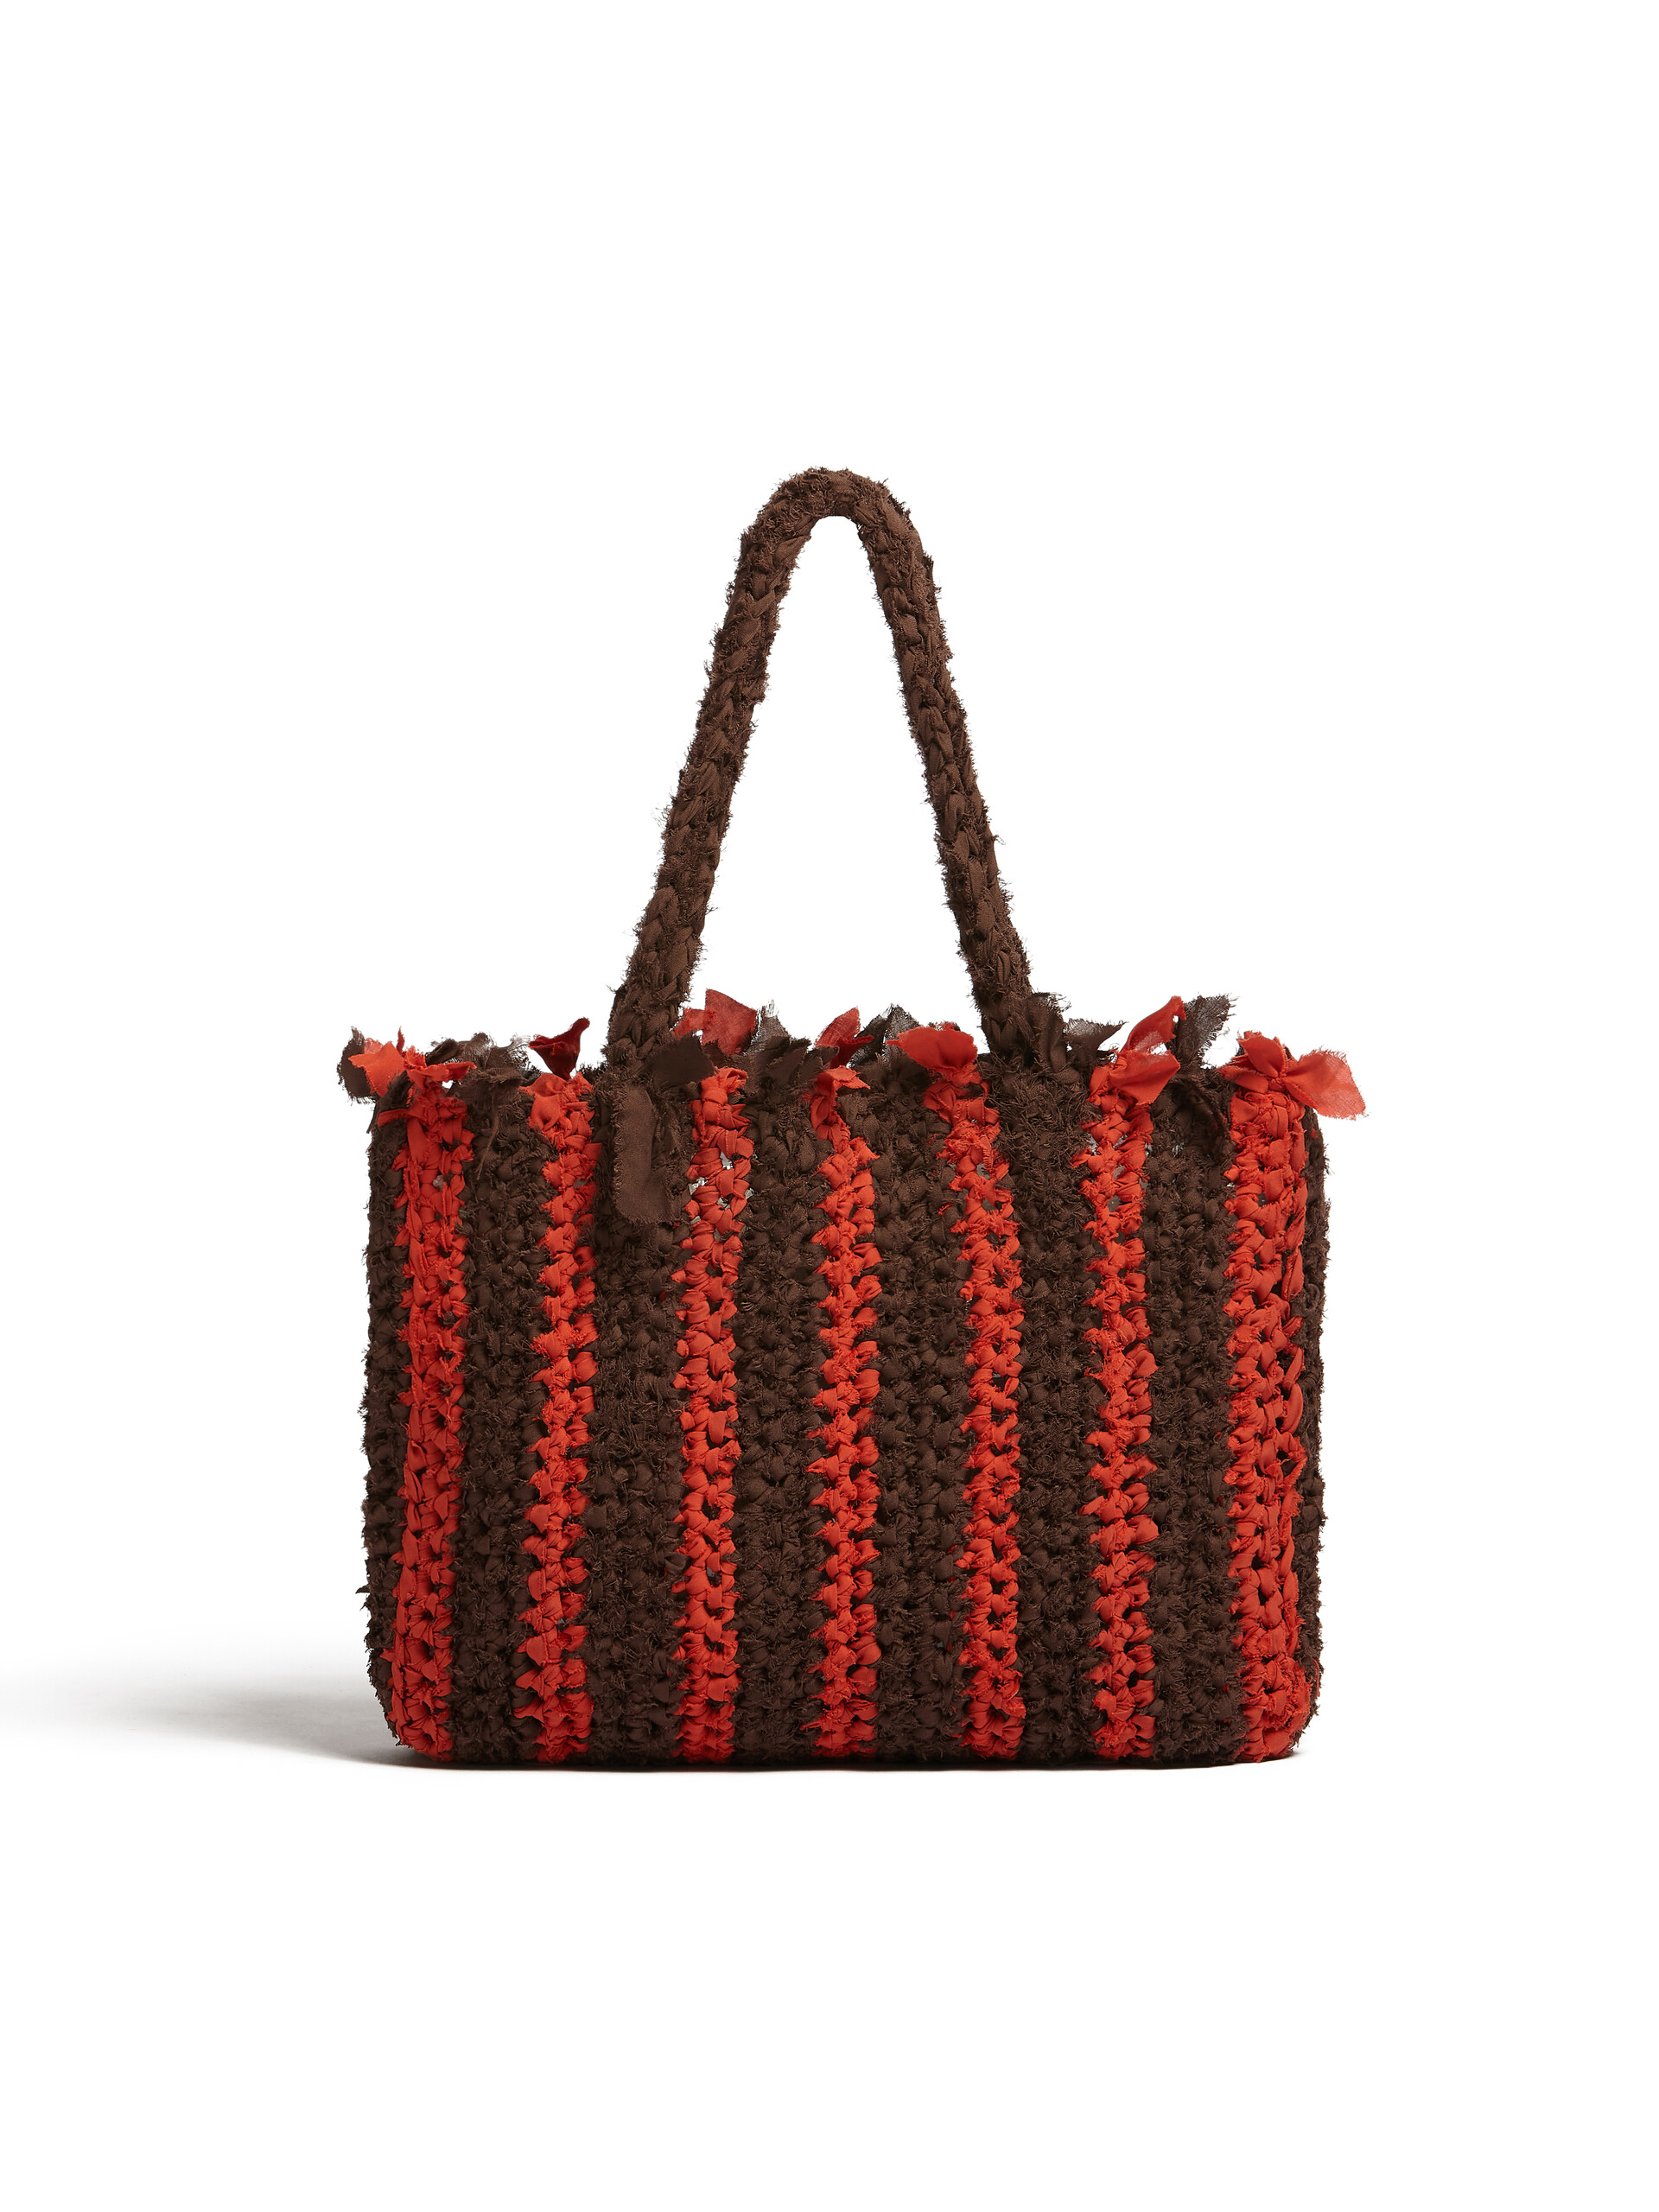 Brown and red cotton MARNI MARKET bag - Bags - Image 3